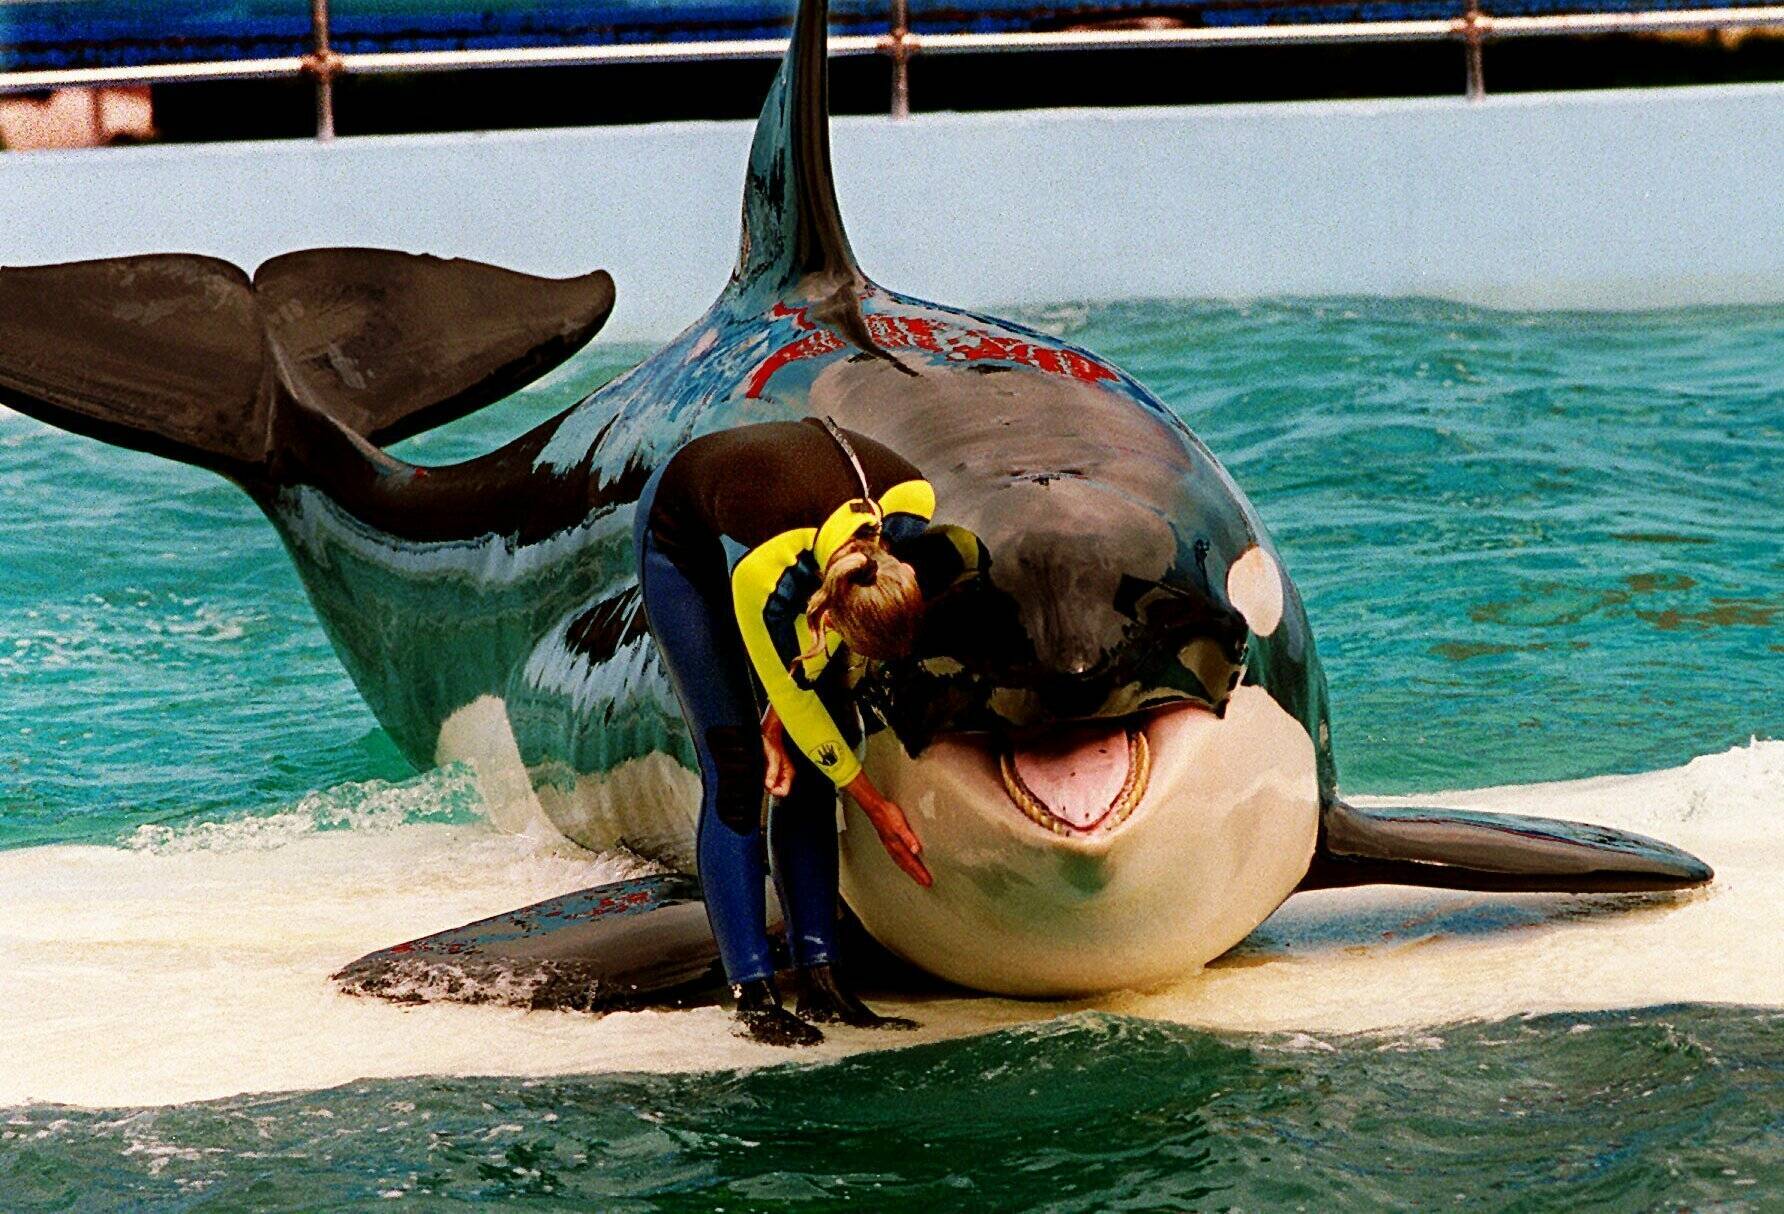 Trainer Marcia Hinton pets Lolita, a captive orca whale, during a performance at the Miami Seaquarium in Miami, March 9, 1995. An unlikely coalition made up of a theme park owner, an animal rights group, a mayor and a philanthropist who owns an NFL team announced Thursday, March 30, 2023, that a plan is in place to return Lolita — an orca that has lived in captivity at the Miami Seaquarium for more than 50 years — to its home waters in the Pacific Northwest. (Nuri Vallbona / Miami Herald)